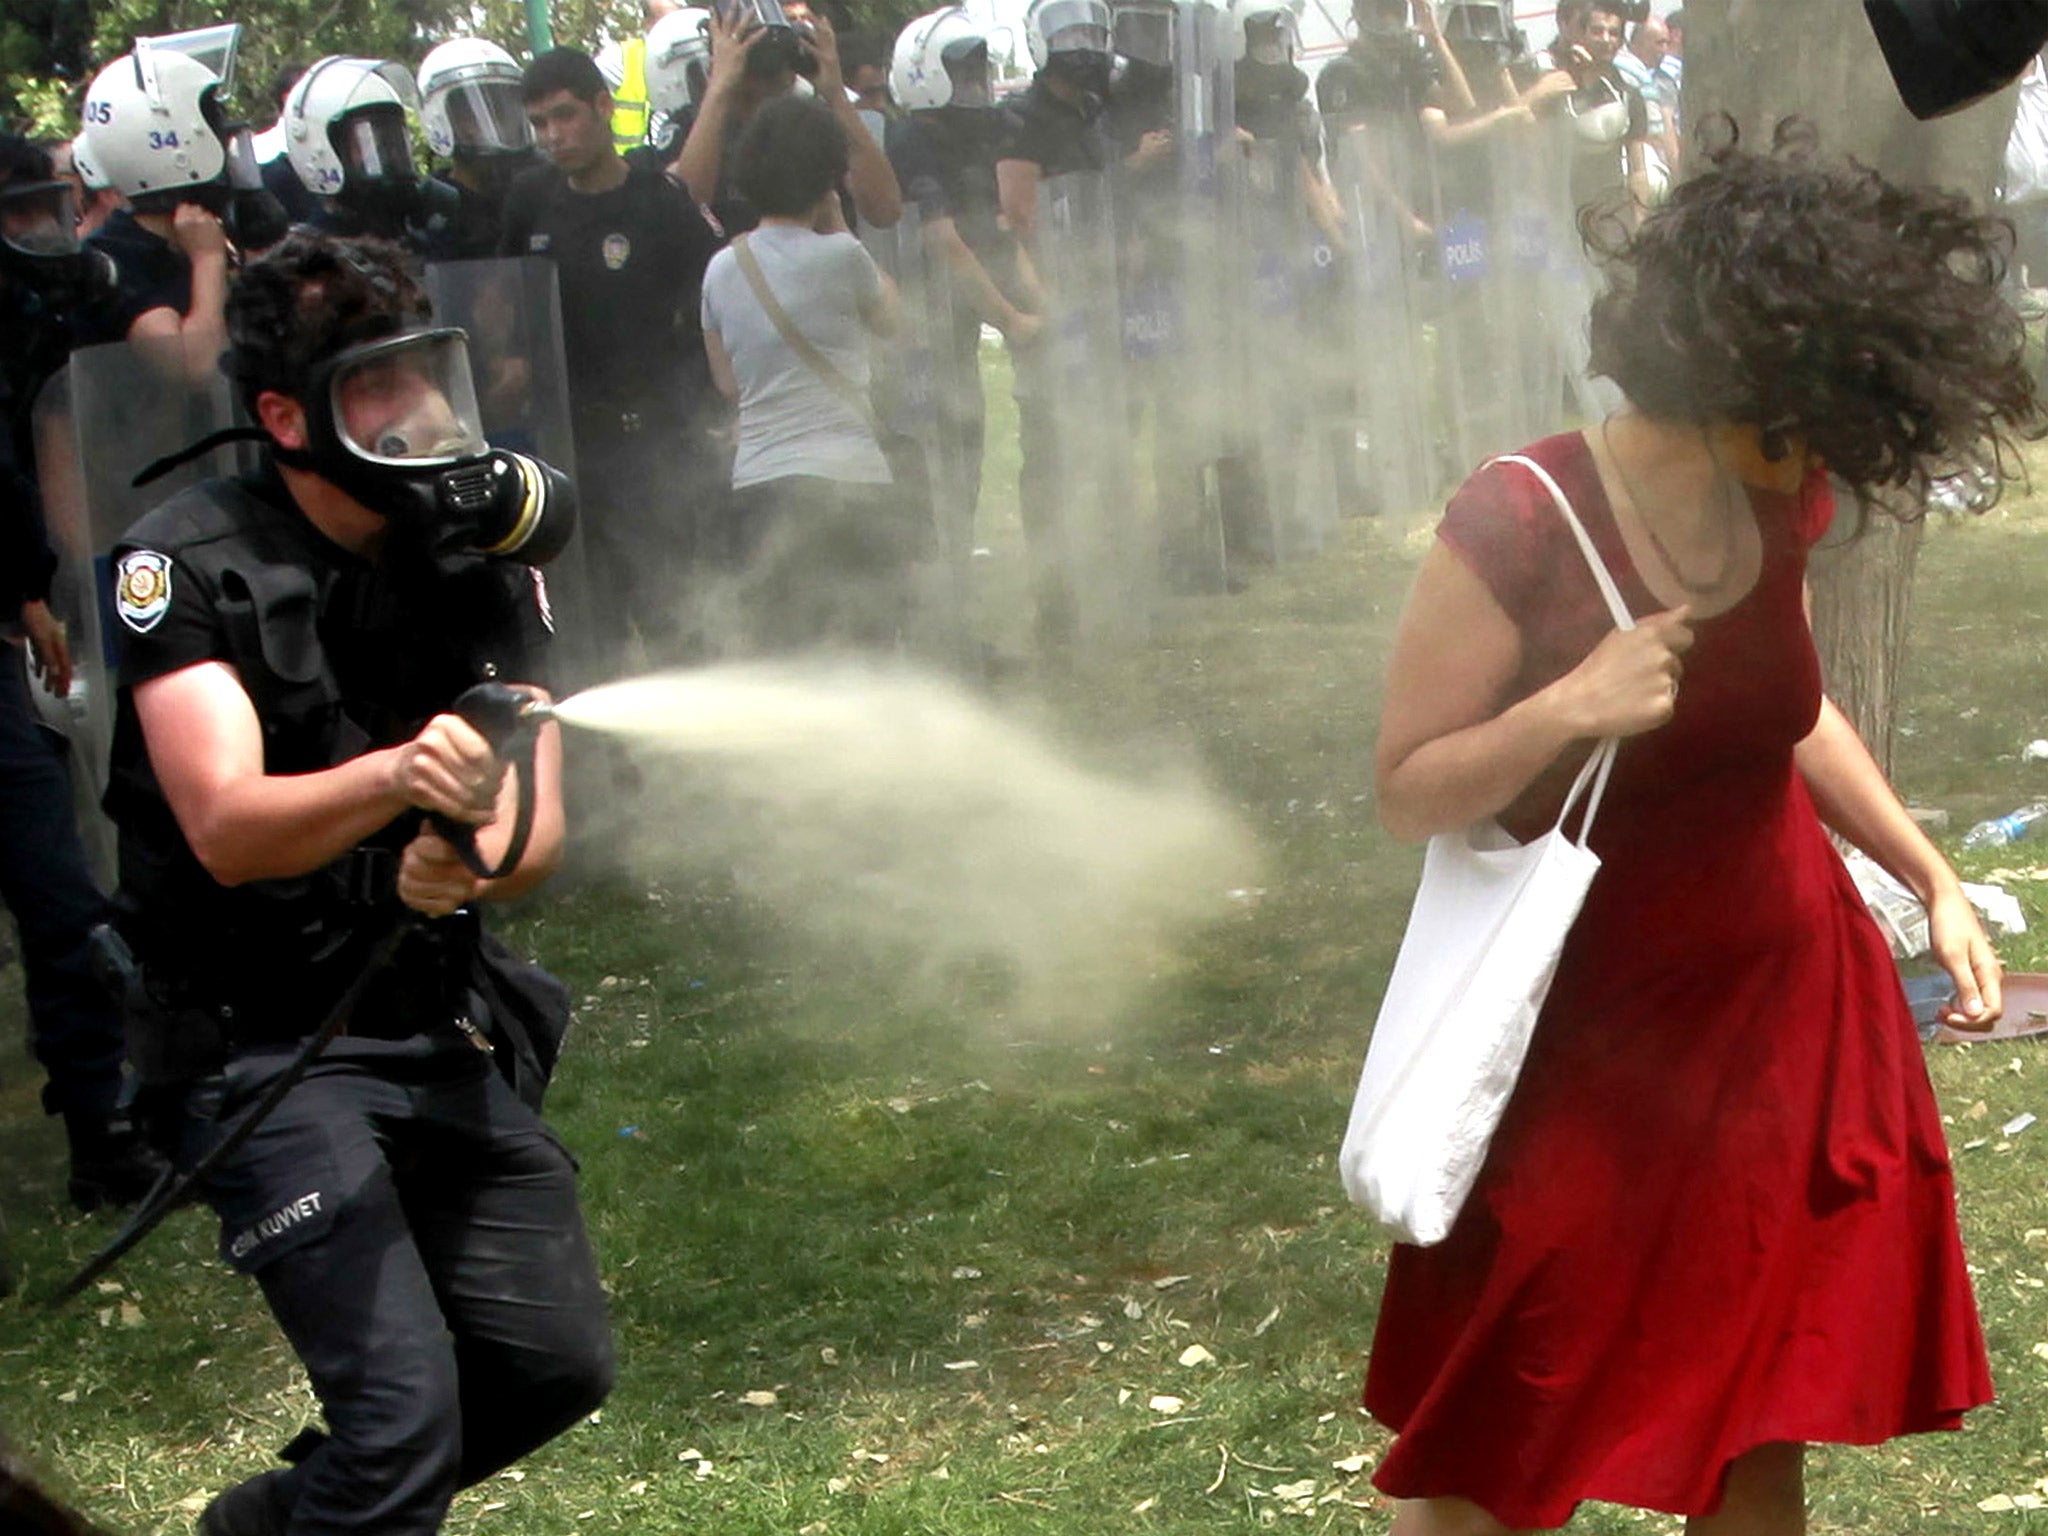 In images from last summer which came to symbolise anti-government protests, the 'lady in the red dress', later identified as Ceyda Sungur, is sprayed with tear gas by a police officer